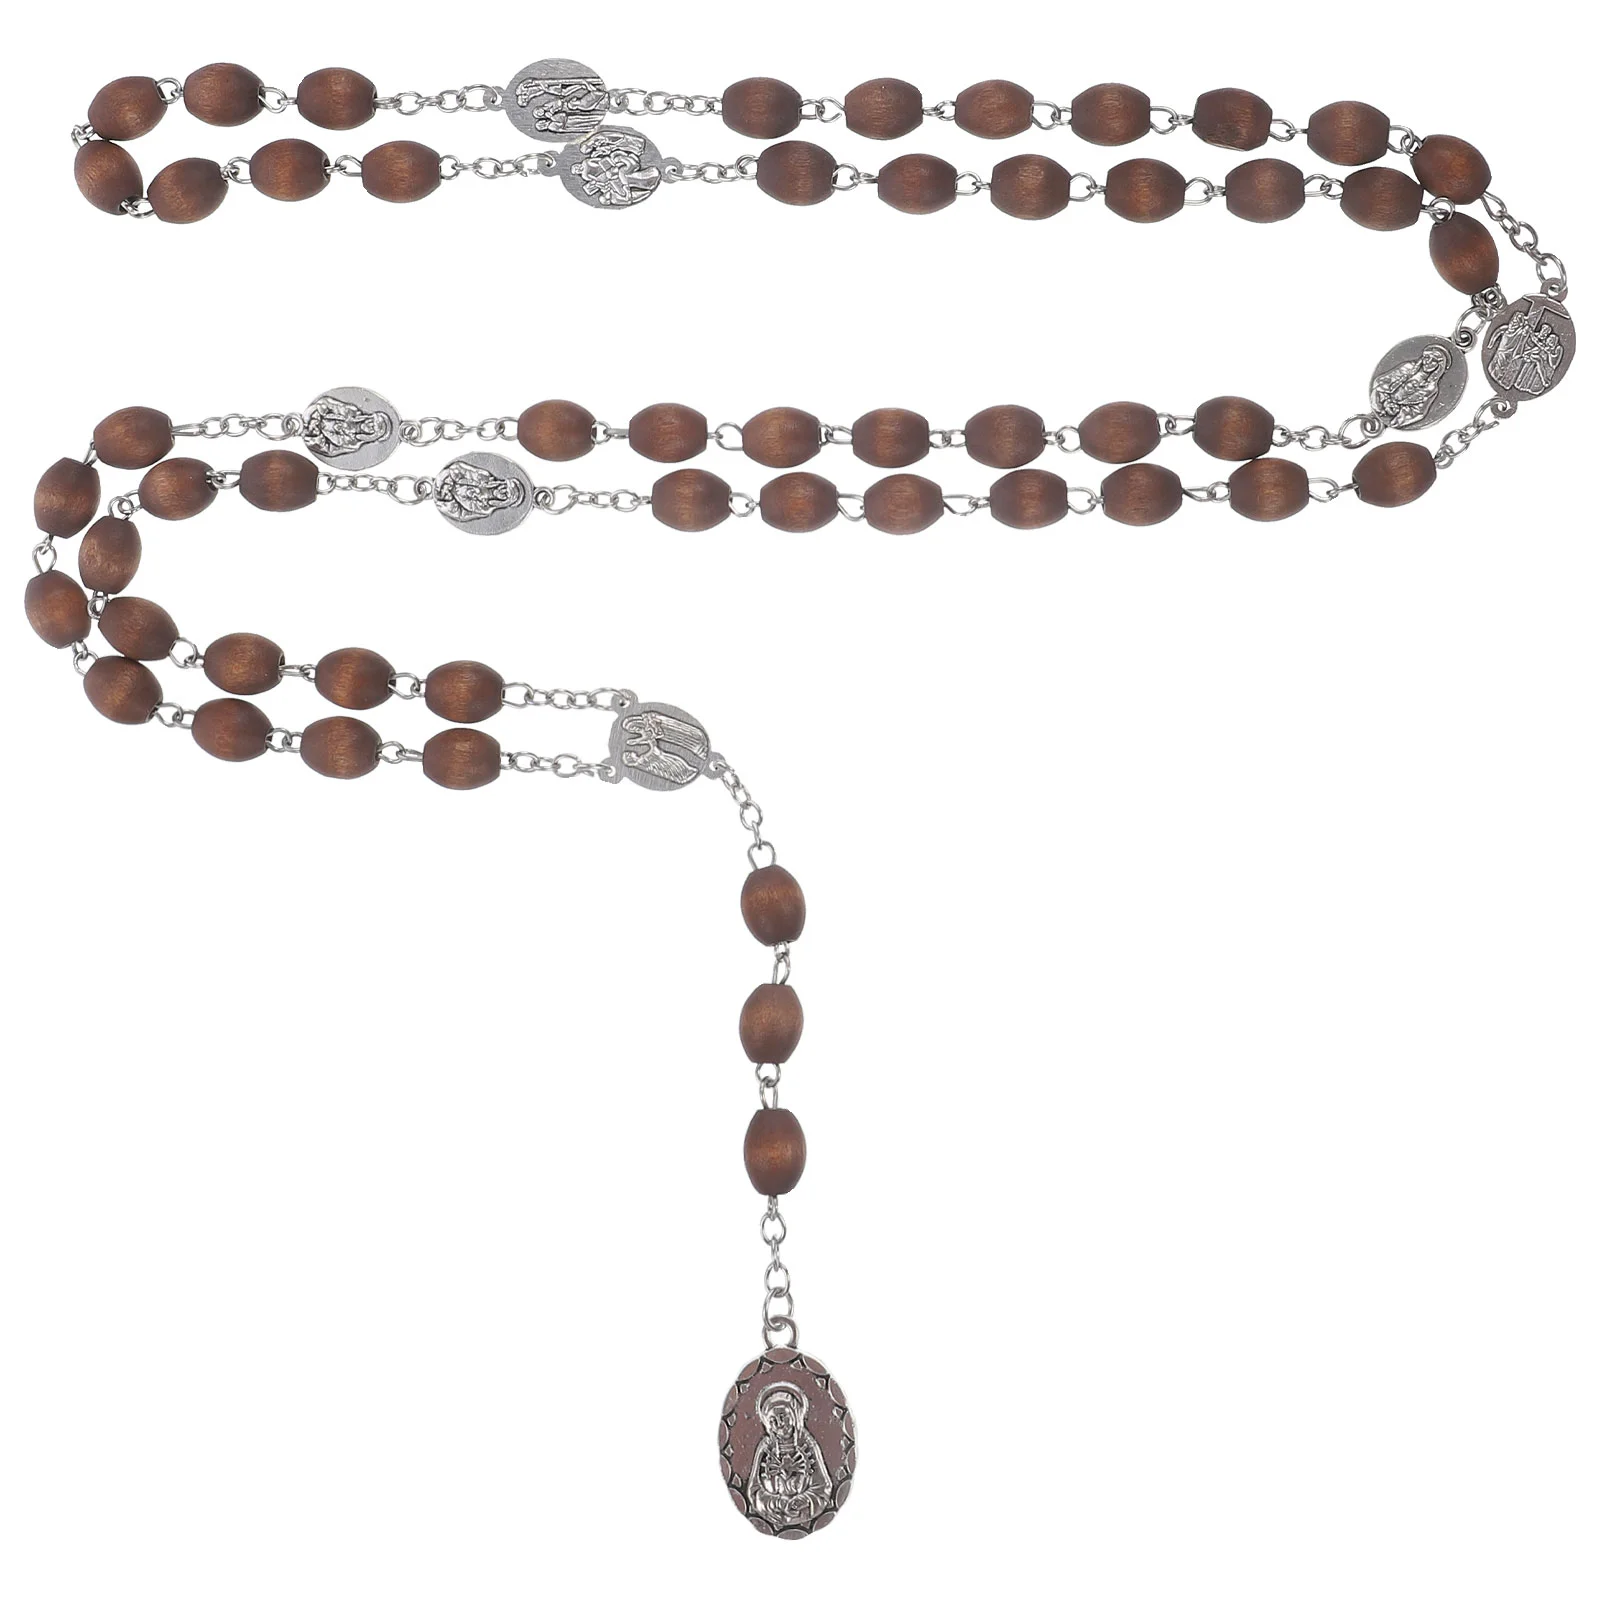 

Beaded Necklace Rosary Beads Chain Catholic Prayer Alloy Aesthetic Necklaces Women Miss Choker